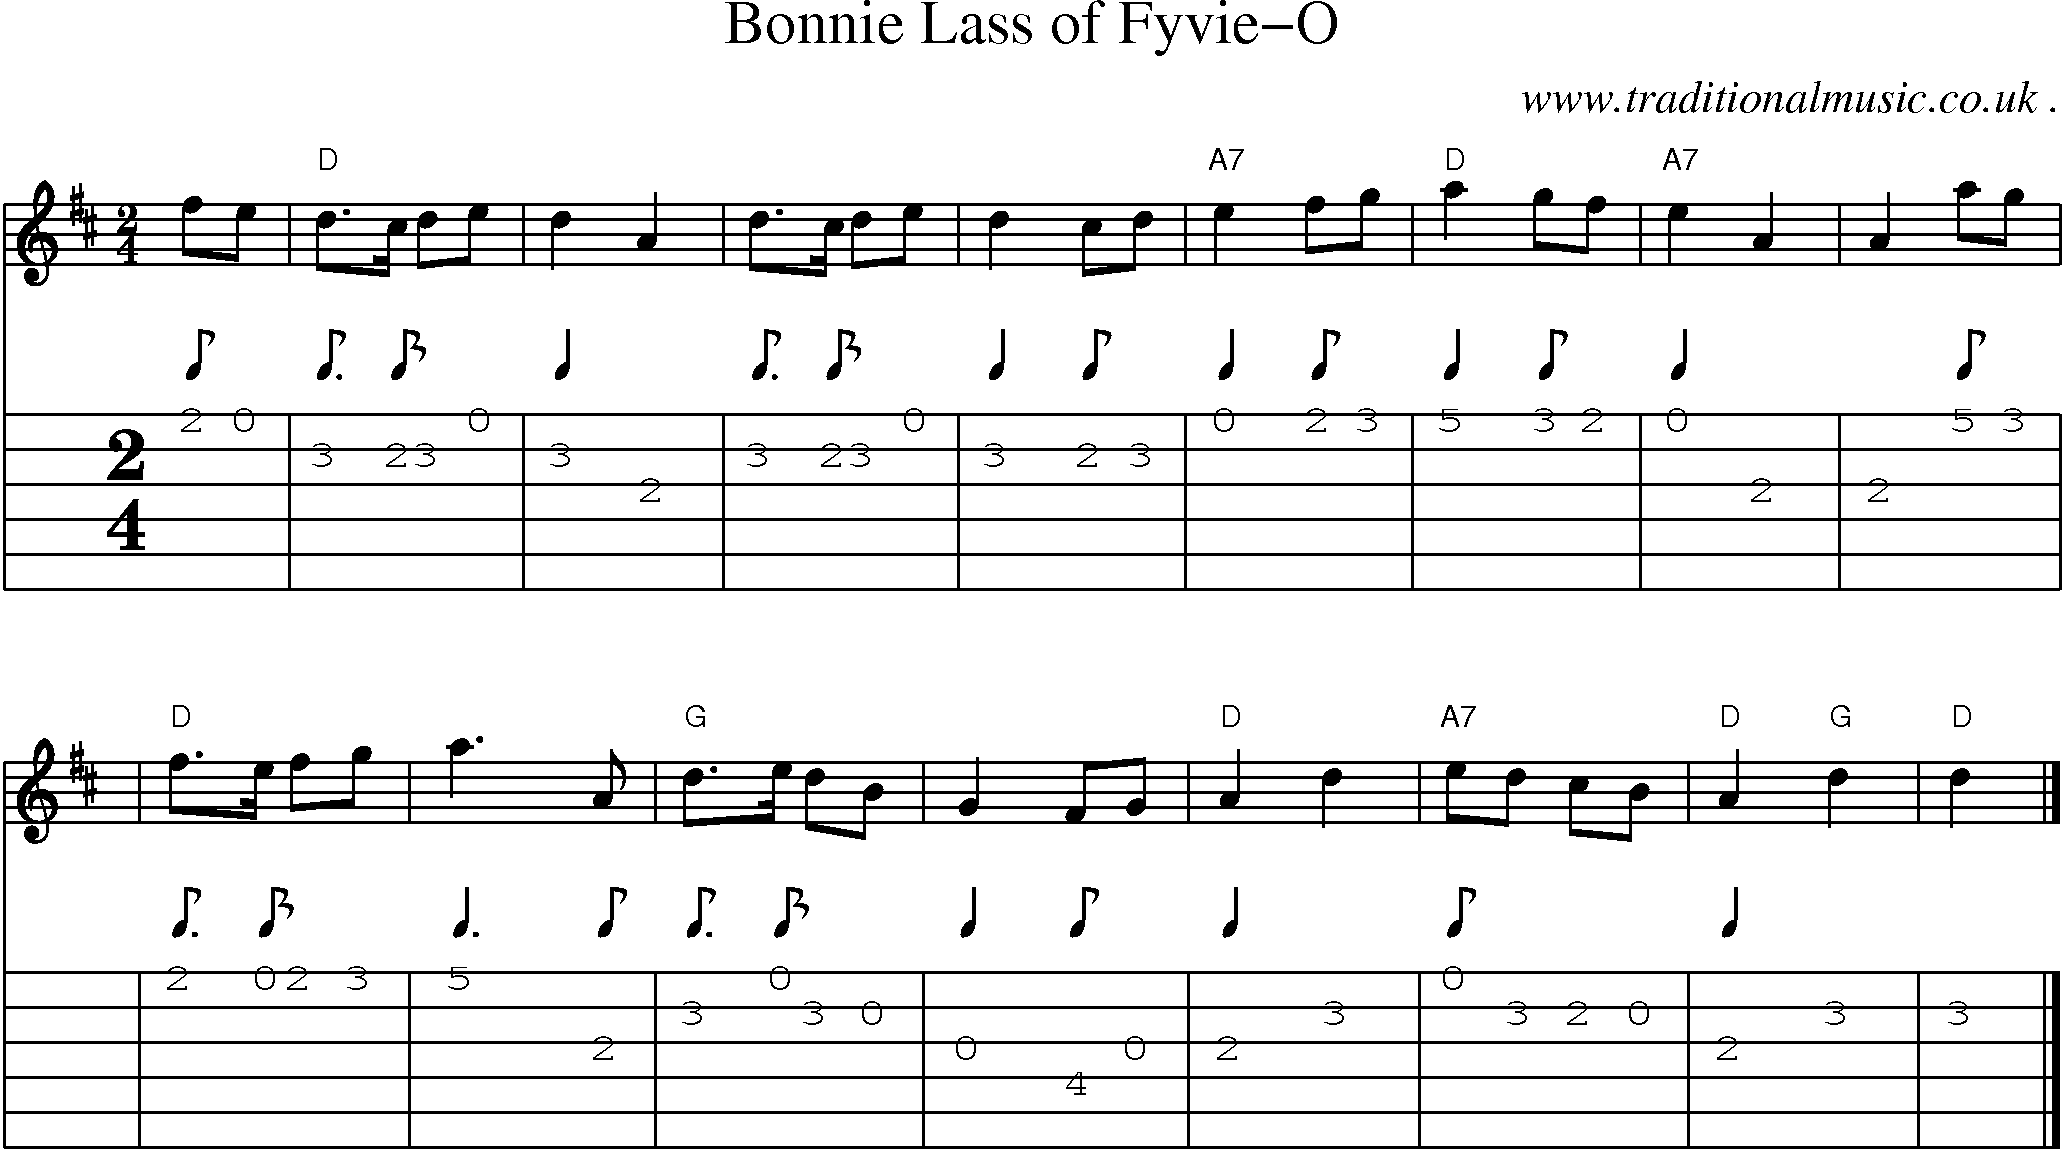 Sheet-music  score, Chords and Guitar Tabs for Bonnie Lass Of Fyvie-o